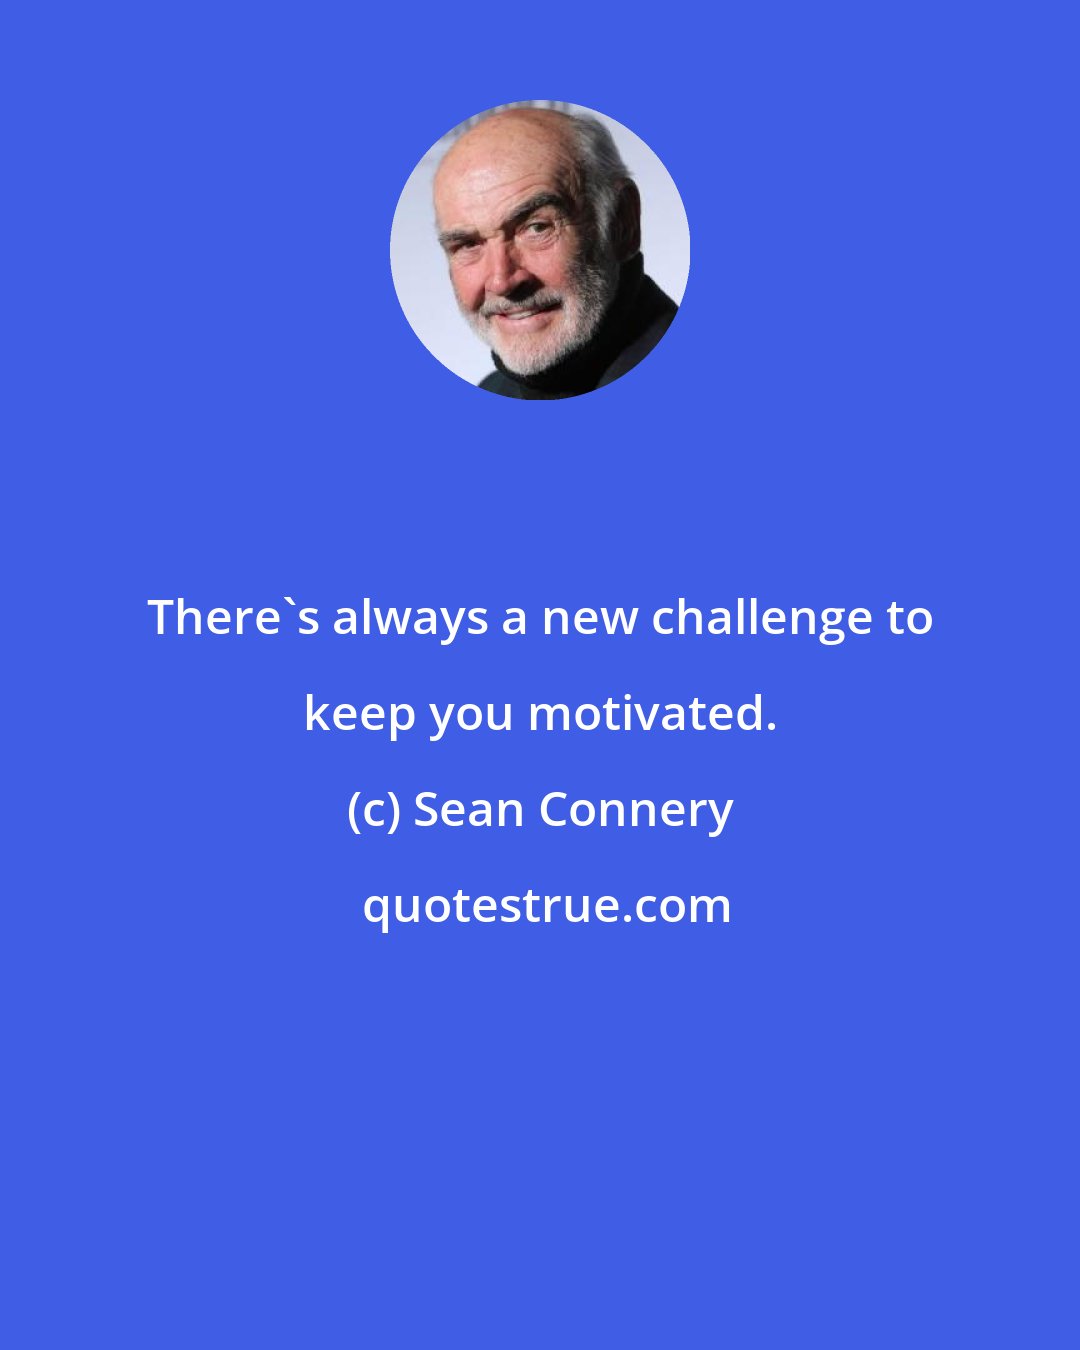 Sean Connery: There's always a new challenge to keep you motivated.